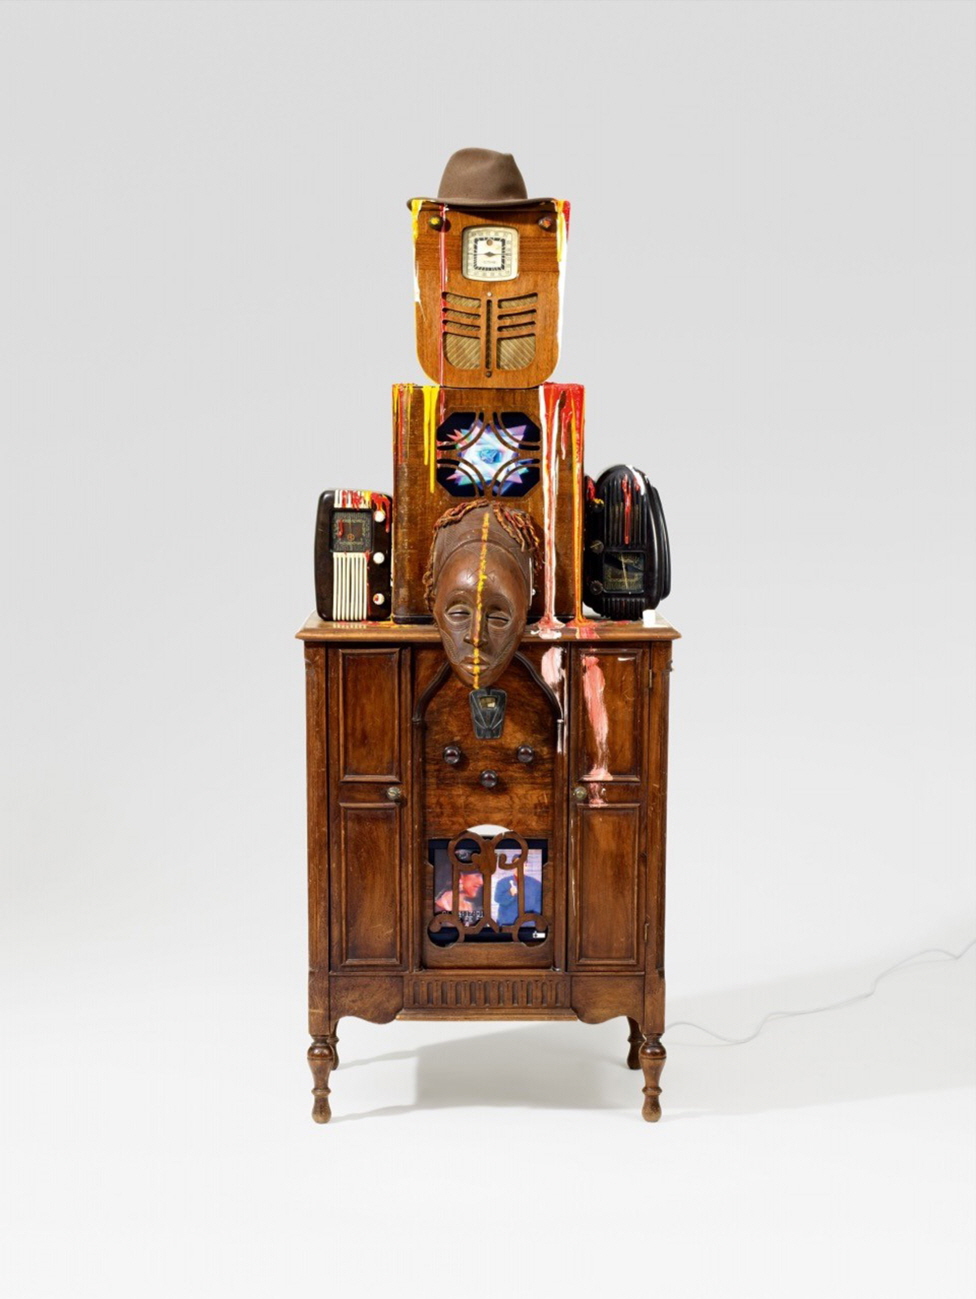 Nam June PAIK, Robot (Radio Man, Joseph Beuys), 1987, 2 vintage radio cabinets, 3 radios, 2 plasma monitors with built-in DVD players, African wooden mask, felt hat, acrylic, 2 DVDs, 194(h)x75x55cm